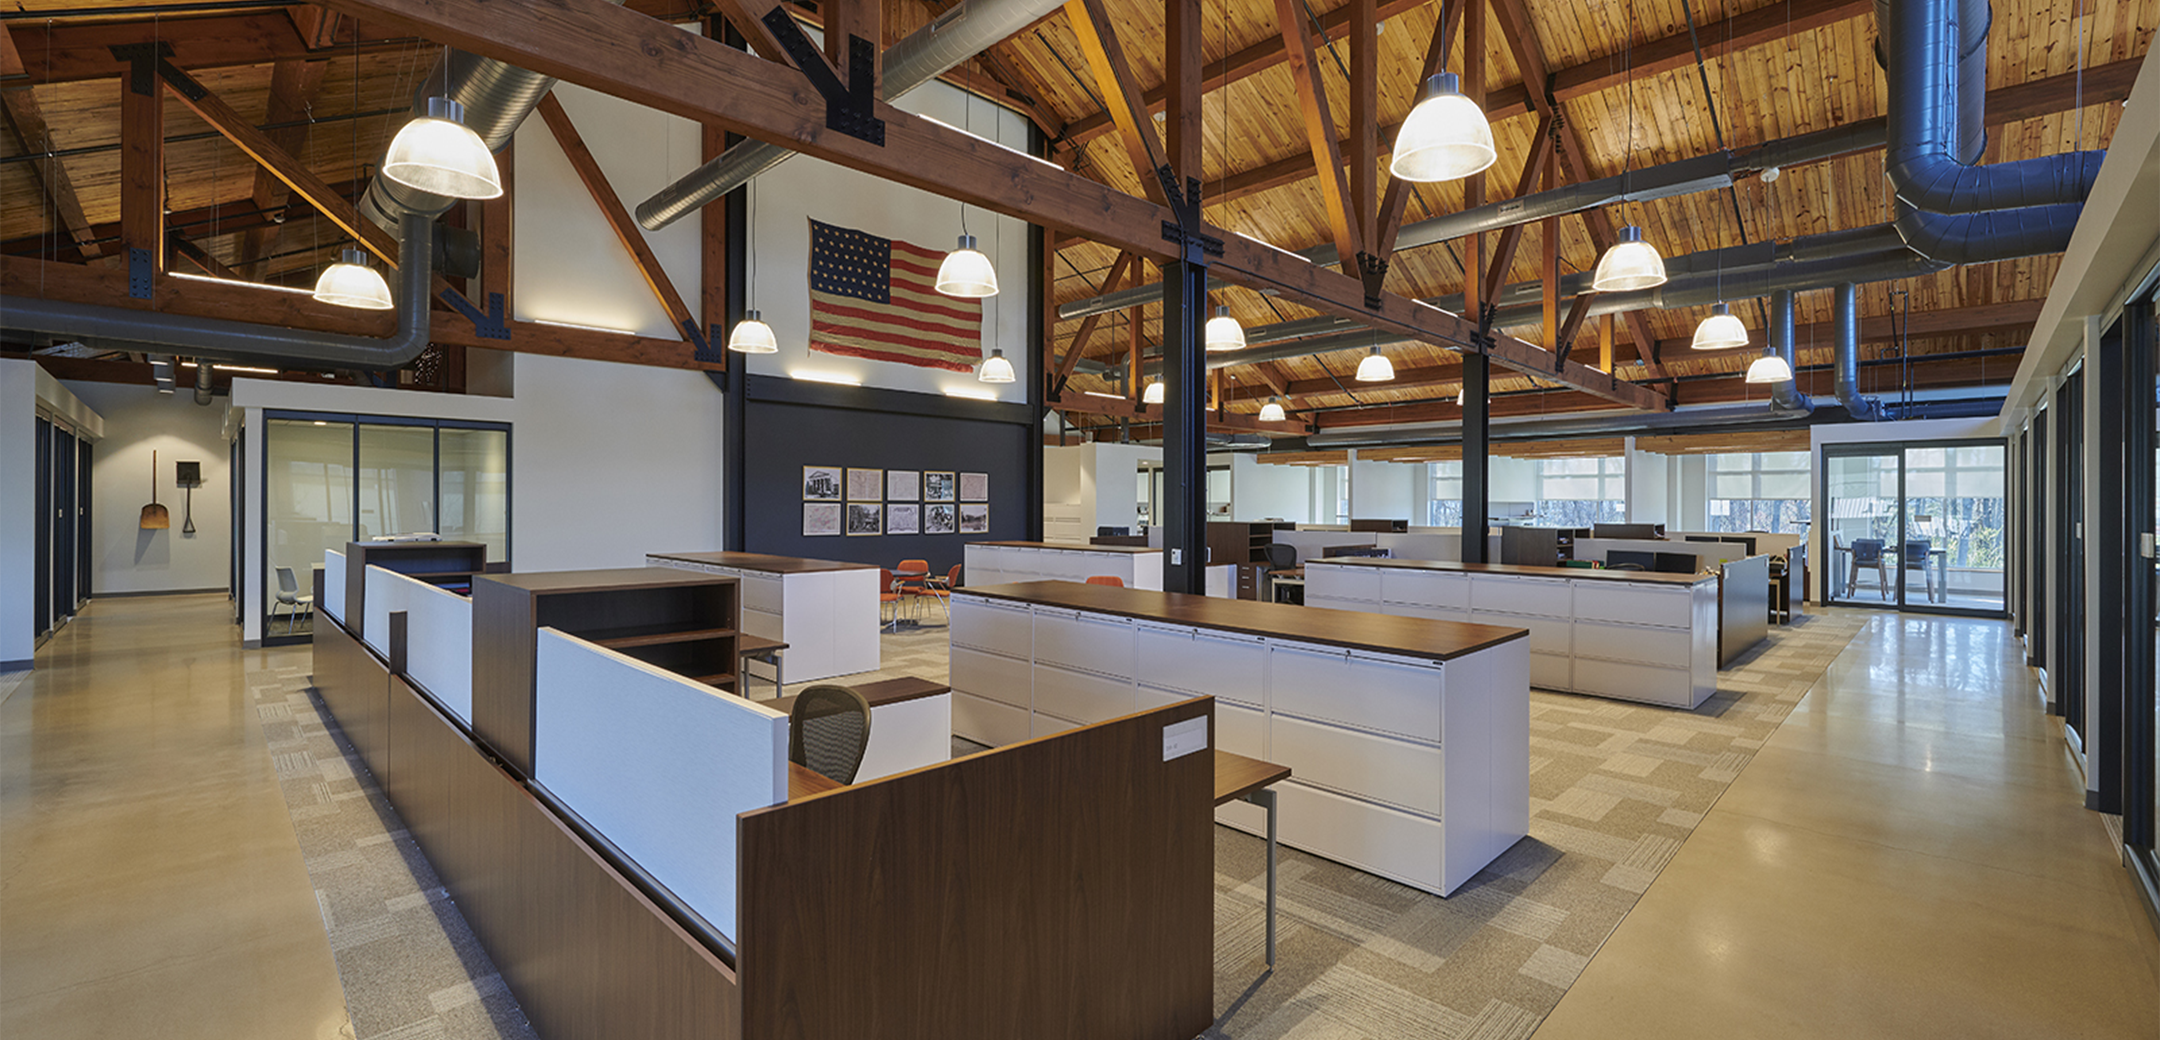 The interior space of Equus Capital Partners headquarters featuring wood ceilings with accent wood trusses, open concept cubicles, and glass paneled conference rooms in the background.